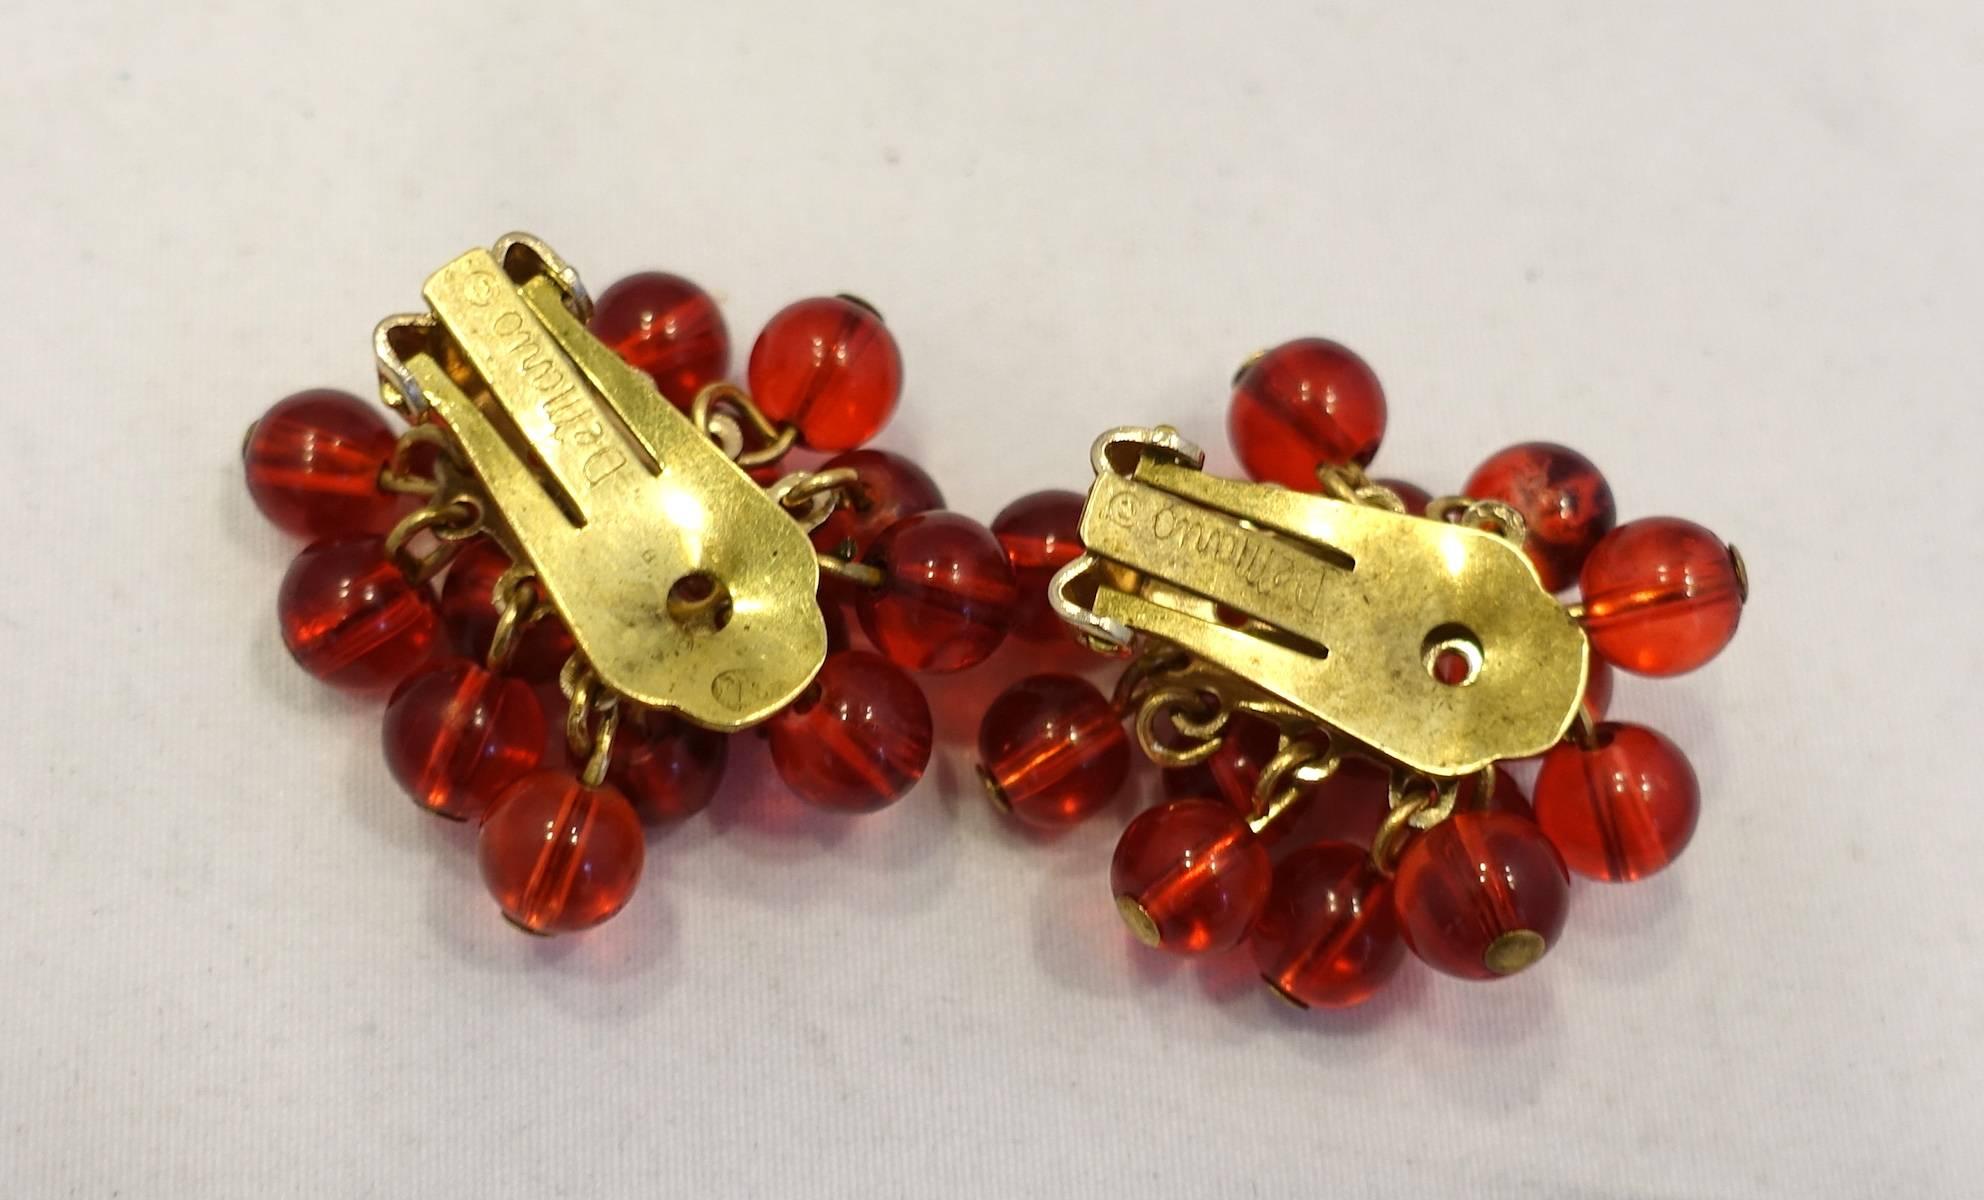 These vintage signed DeMario earrings are designed with red glass beads in a gold tone setting.  These clip earrings measure 1” x 1” and are signed “DeMario”.  They are in excellent condition.